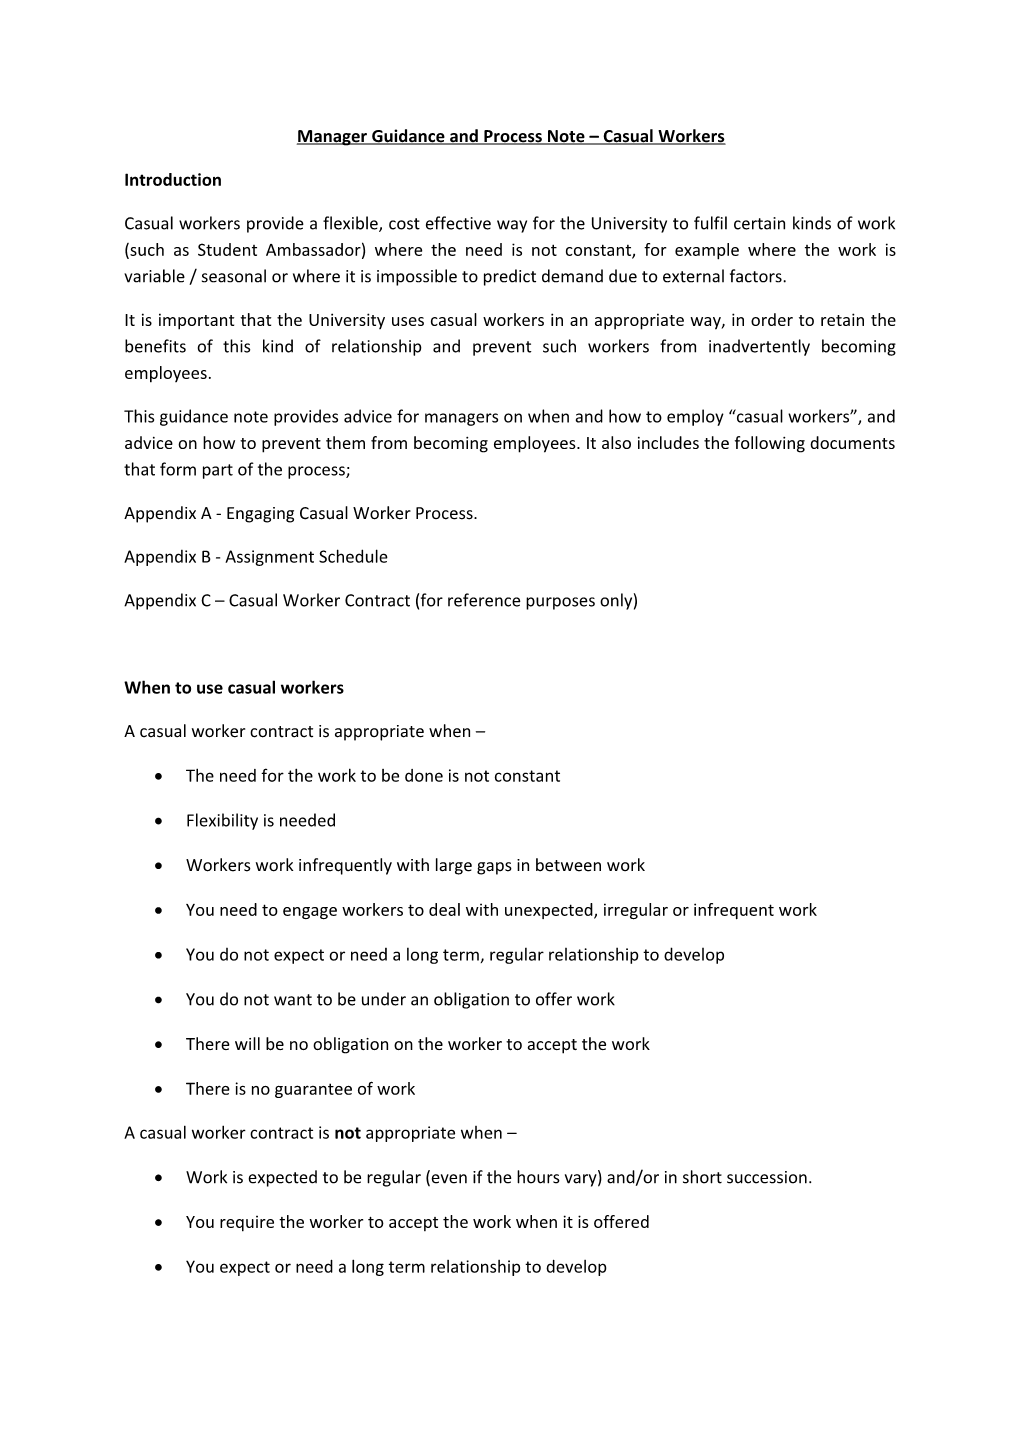 Manager Guidance Note Casual Workers